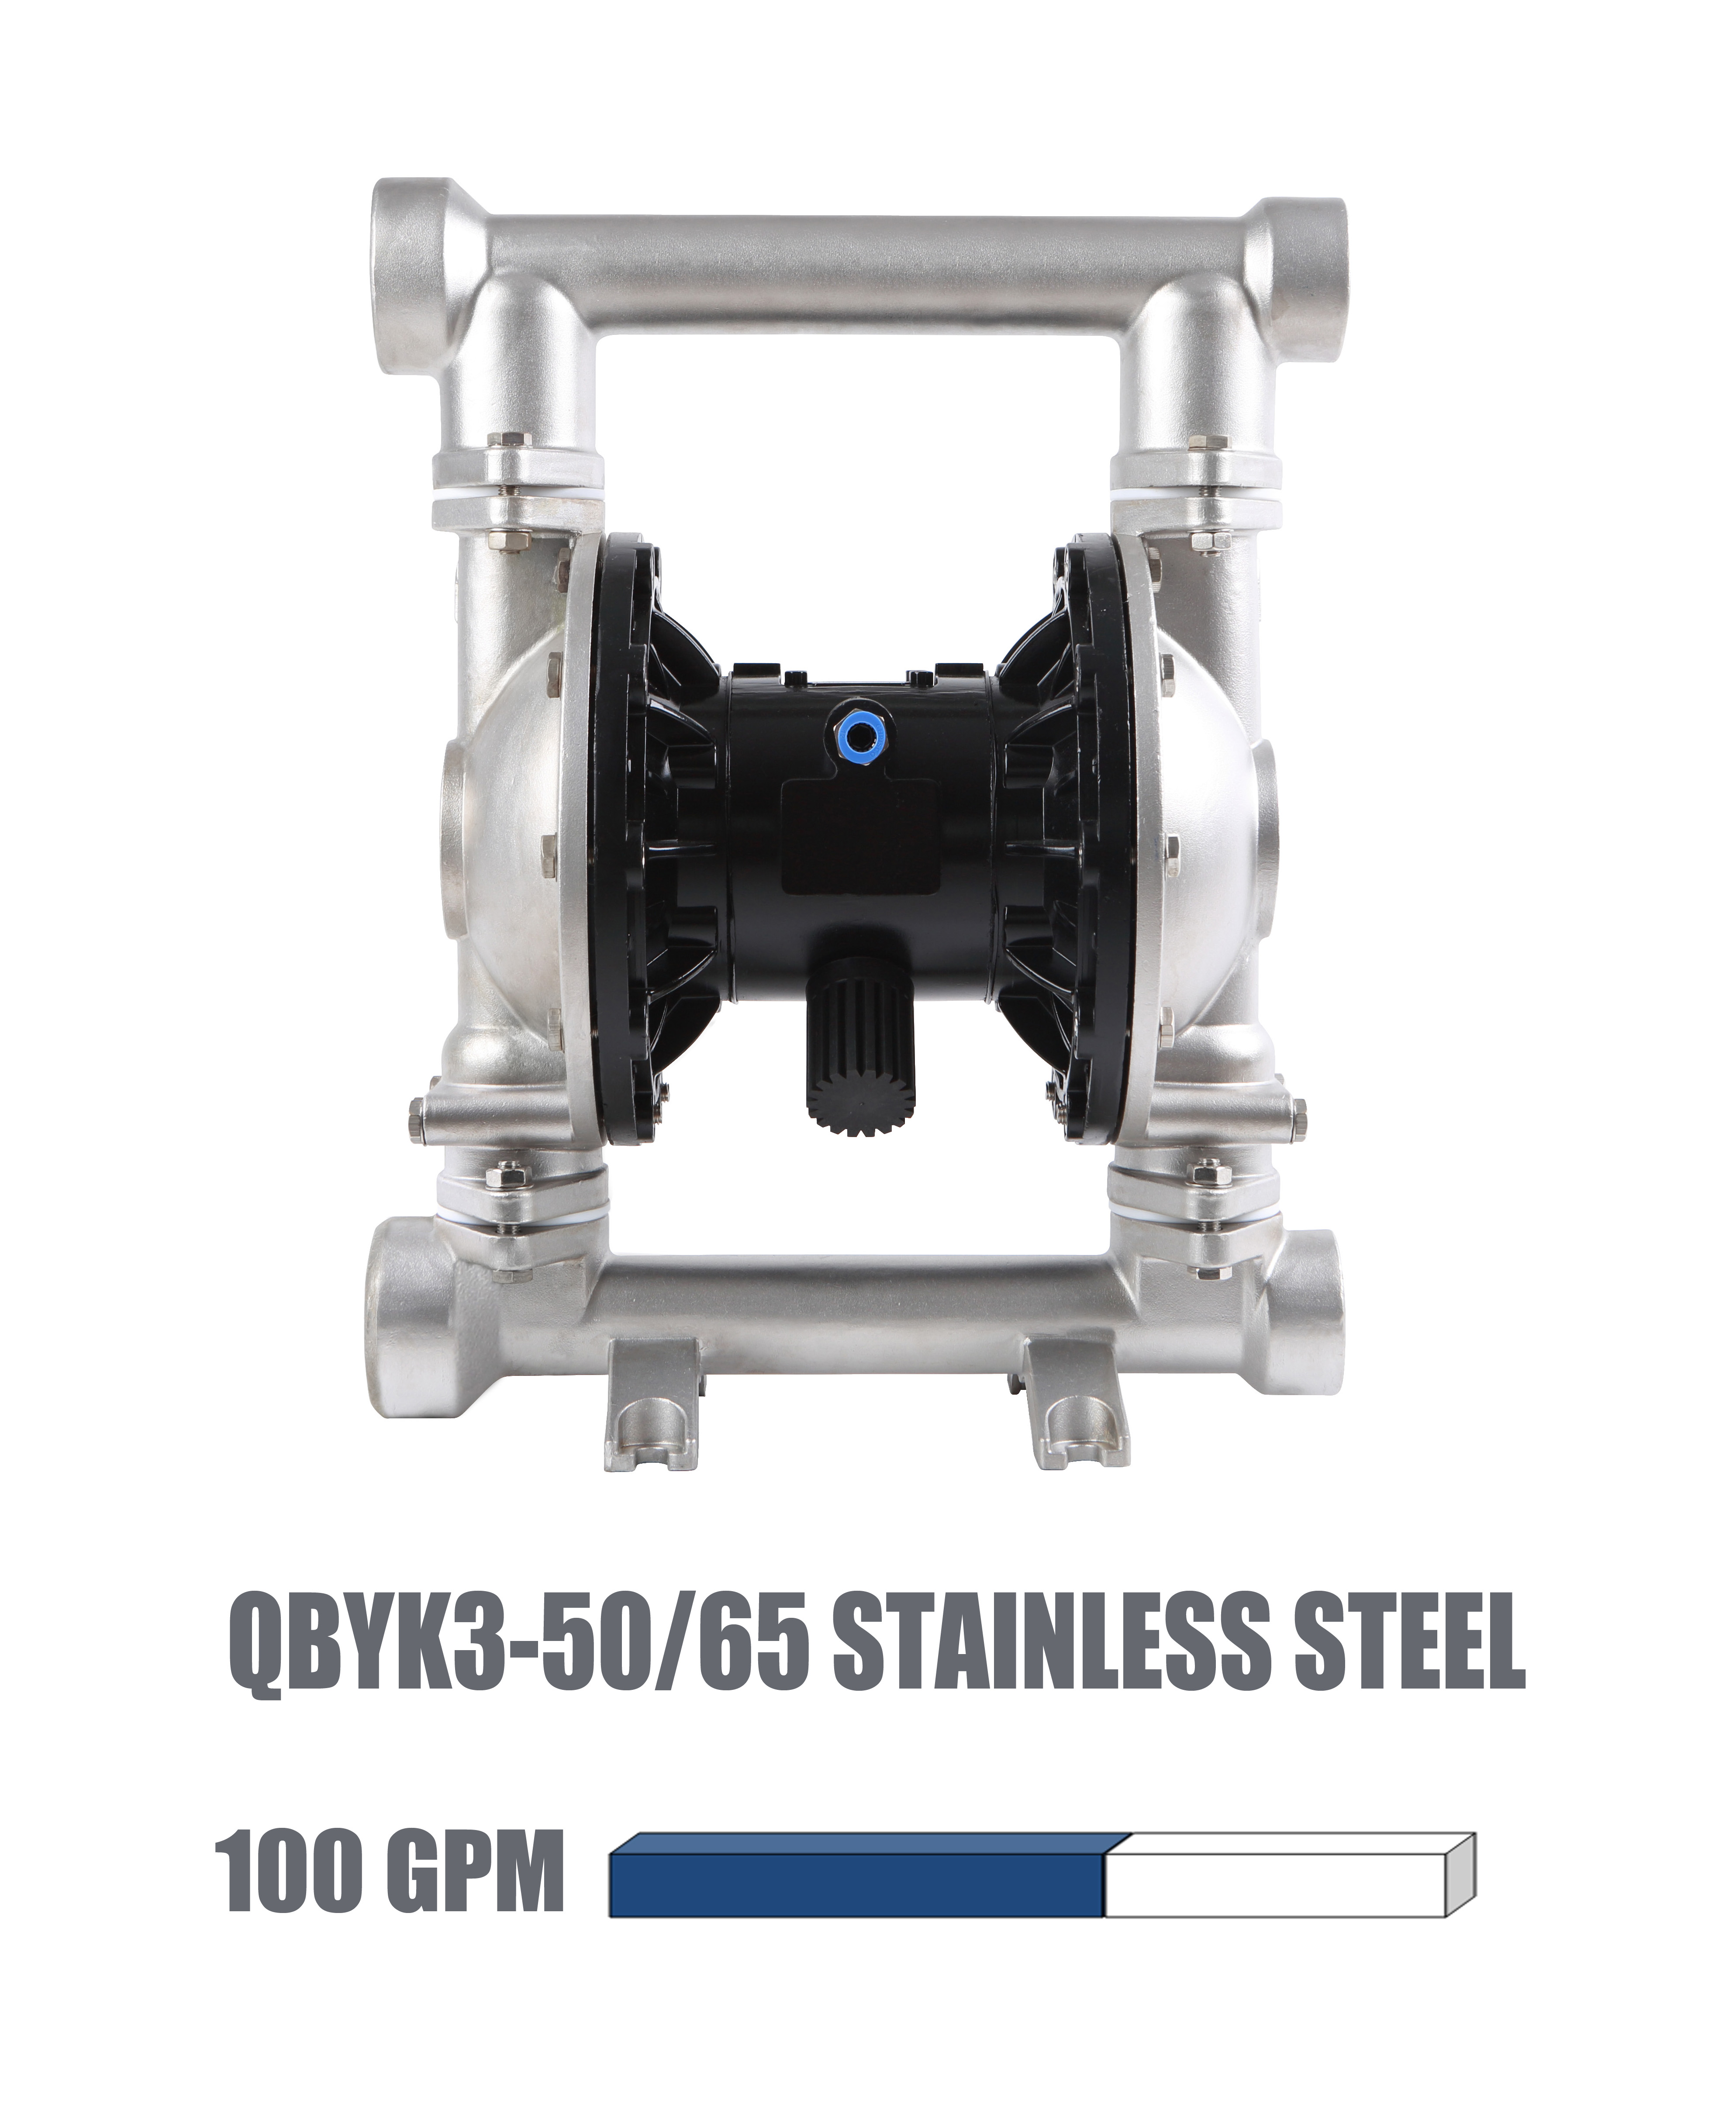 QBYK3-50/65 Stainless steel